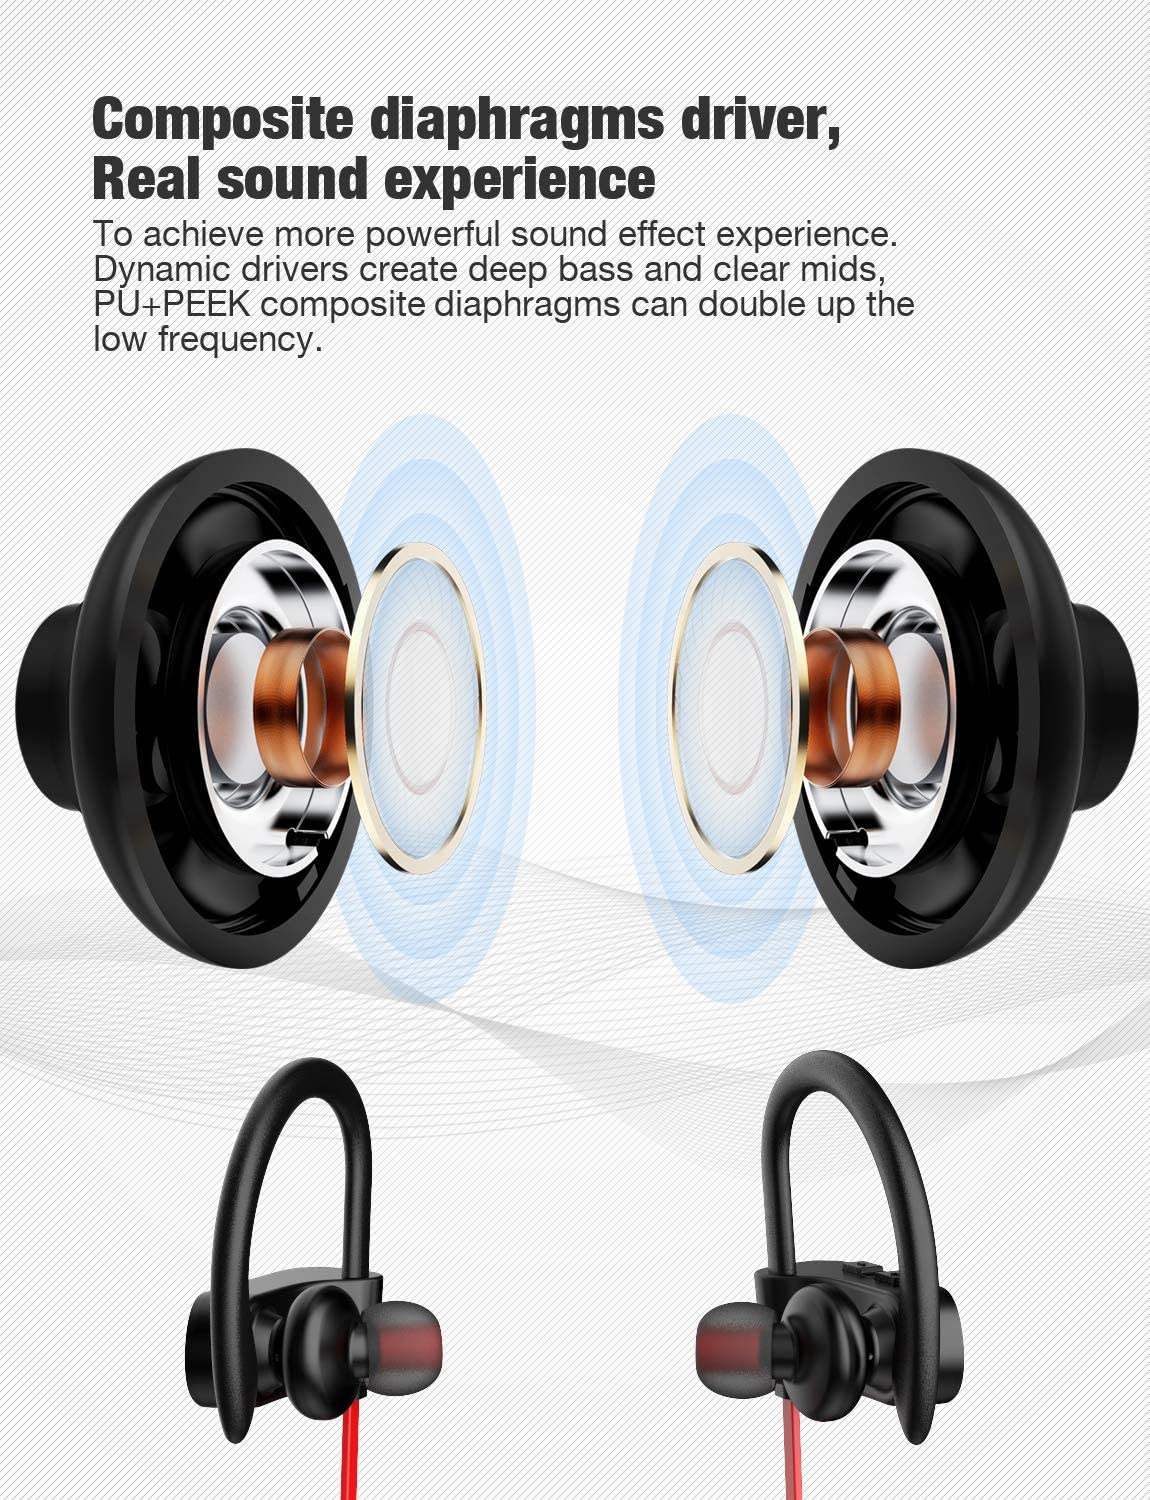 BLACK TRINIDa IPX7 Waterproof Sport Wireless headset for running Best In ear earbuds HiFi Stereo with Mic 10 hours playback Gym workout passive Noise Cancel wireless earphones Bluetooth headphones